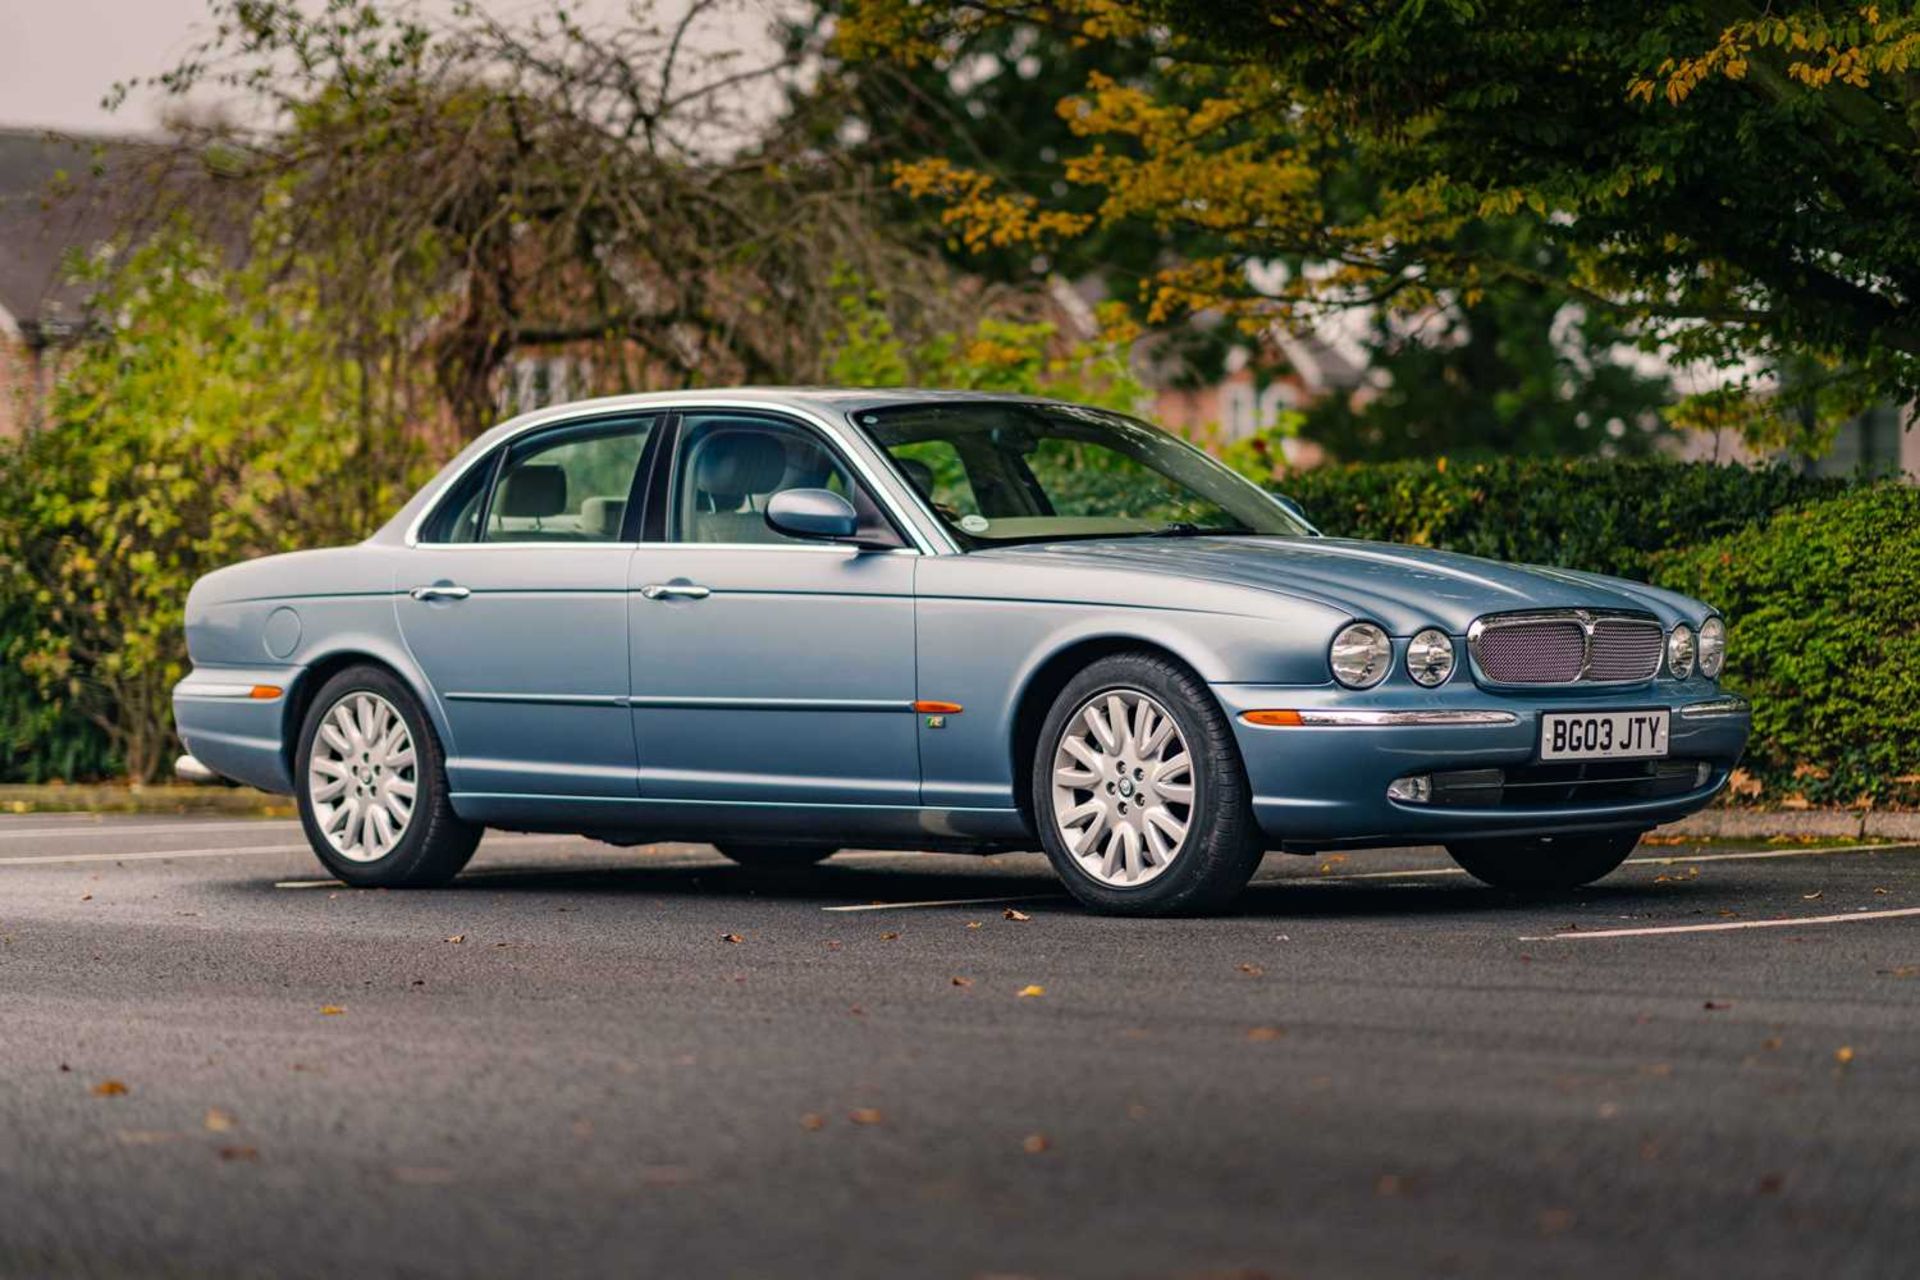 2003 Jaguar XJ8 4.2 V8 SE Range-topping 'Special Equipment' model, with a current MOT and warranted 